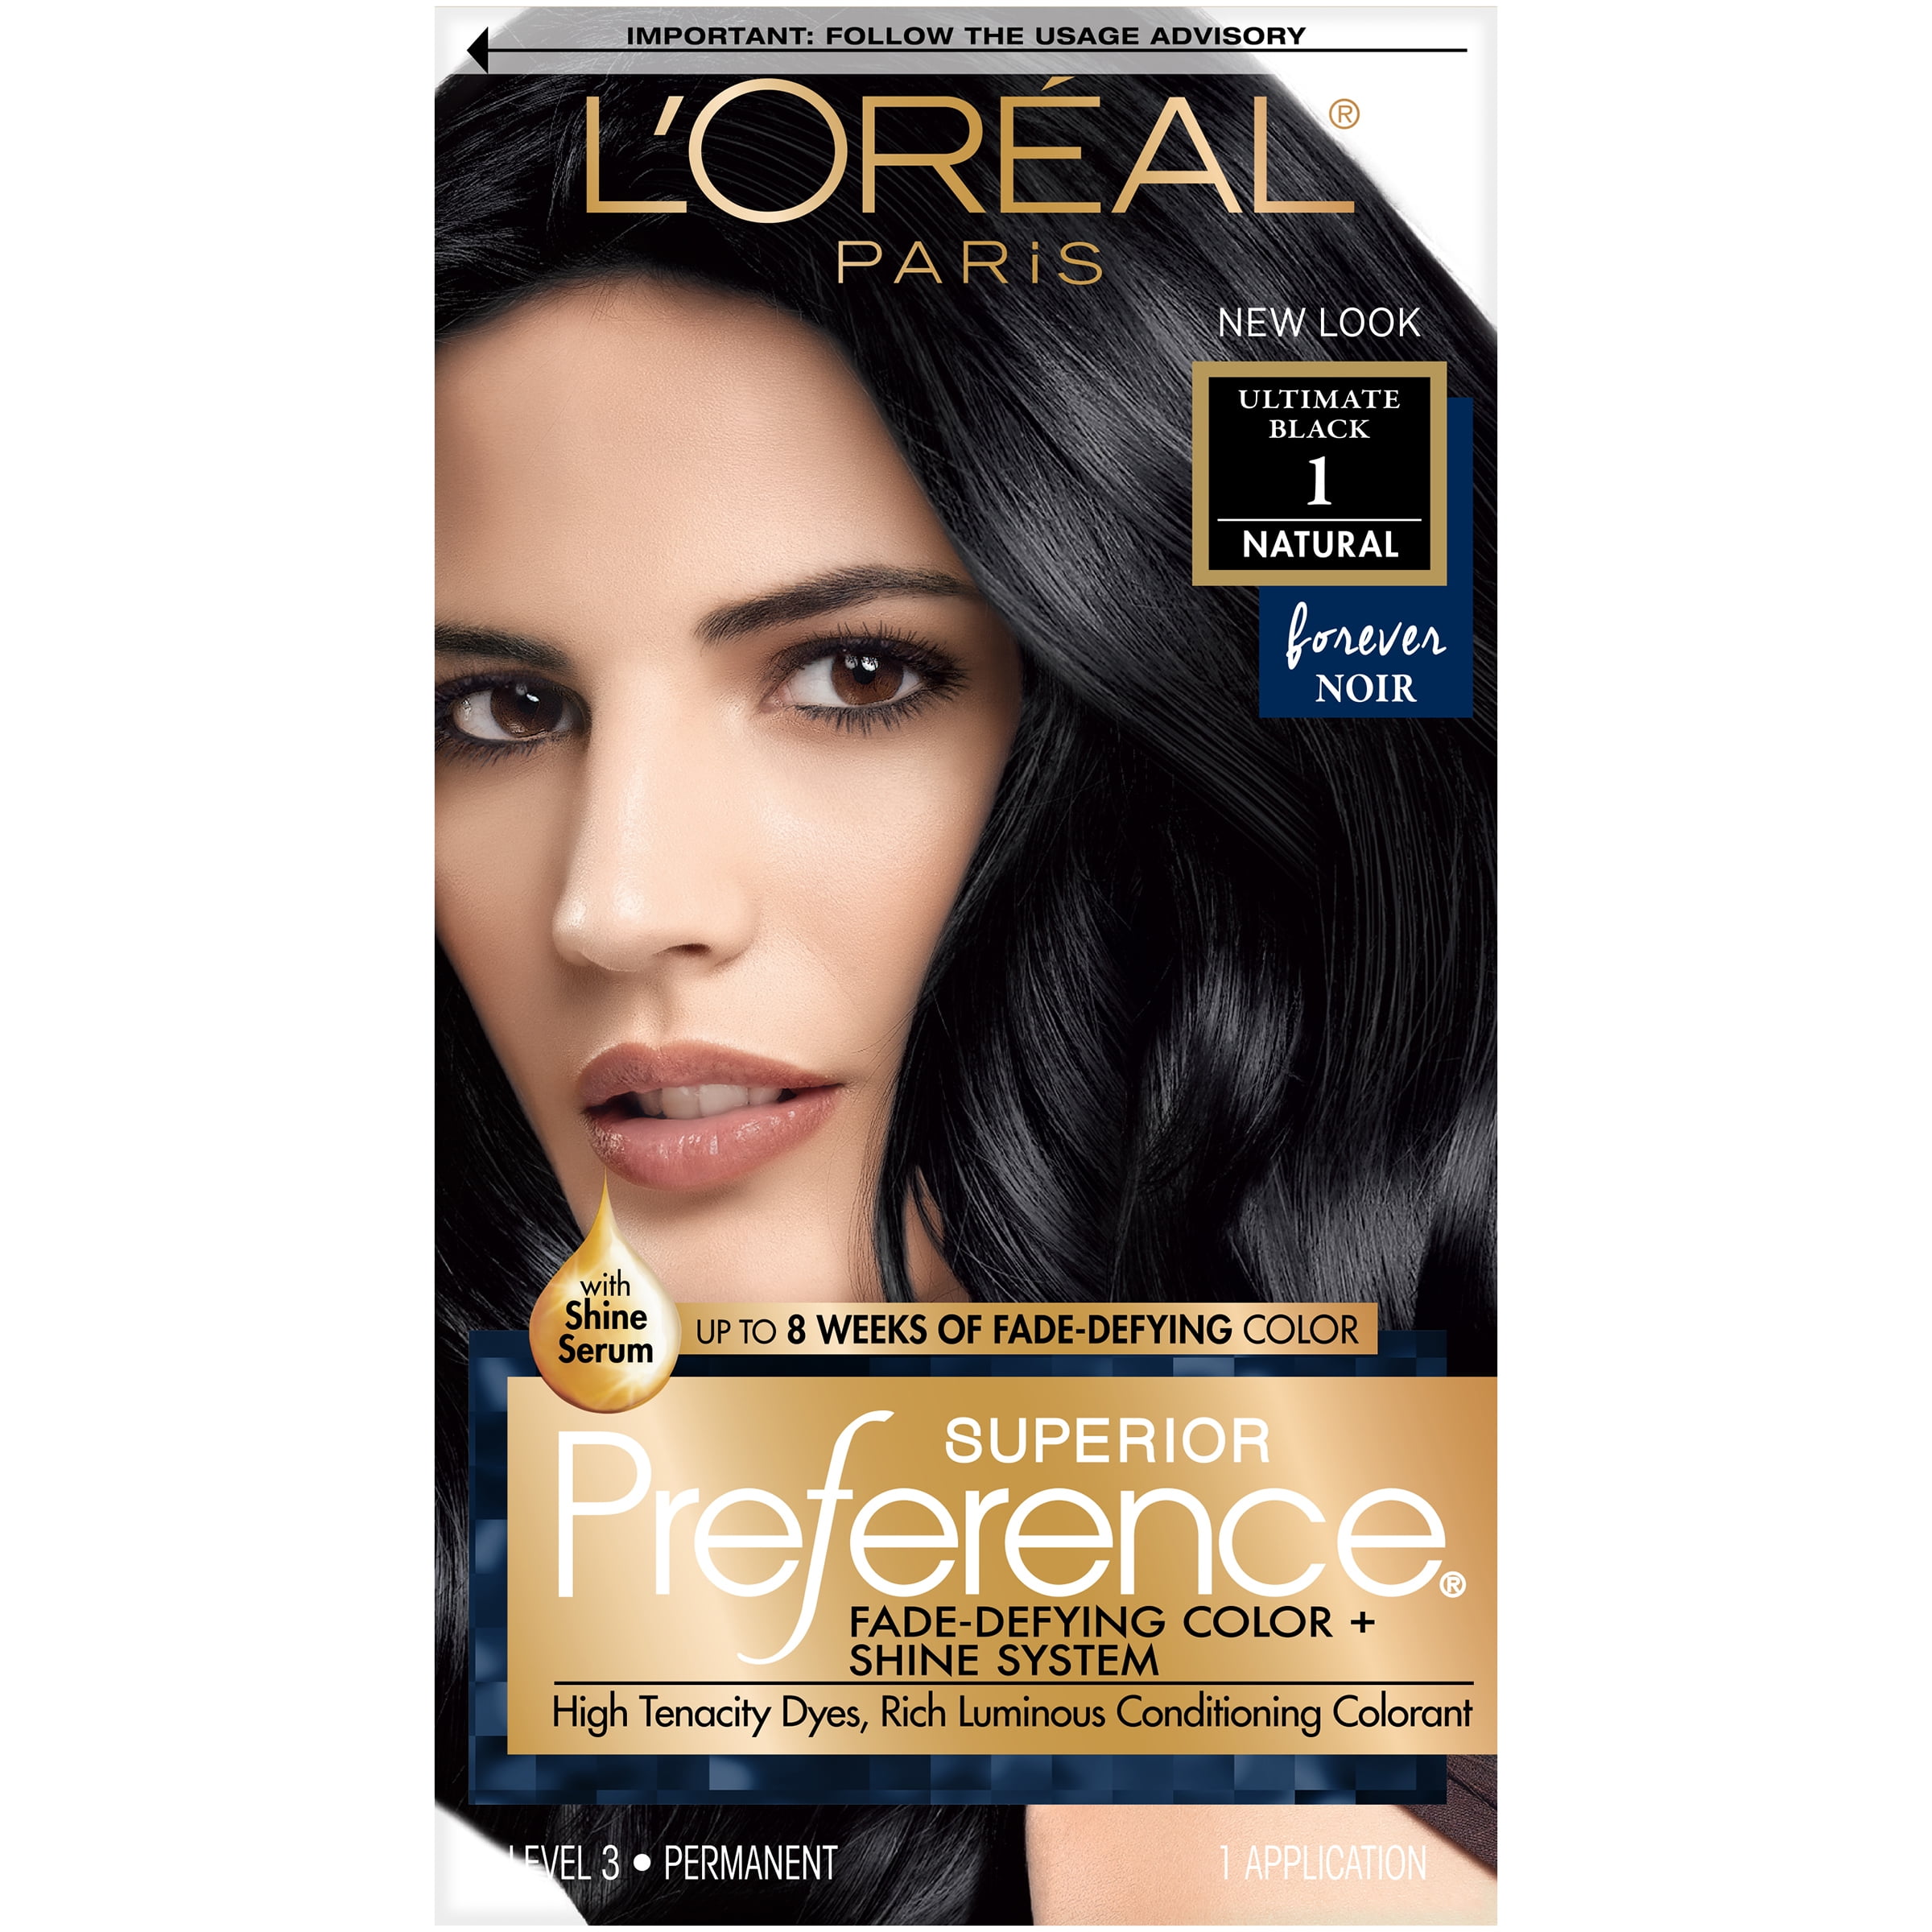 L'Oreal Paris Superior Preference Fade-Defying Shine Permanent Hair Color,   Ultimate Black, 1 Kit 